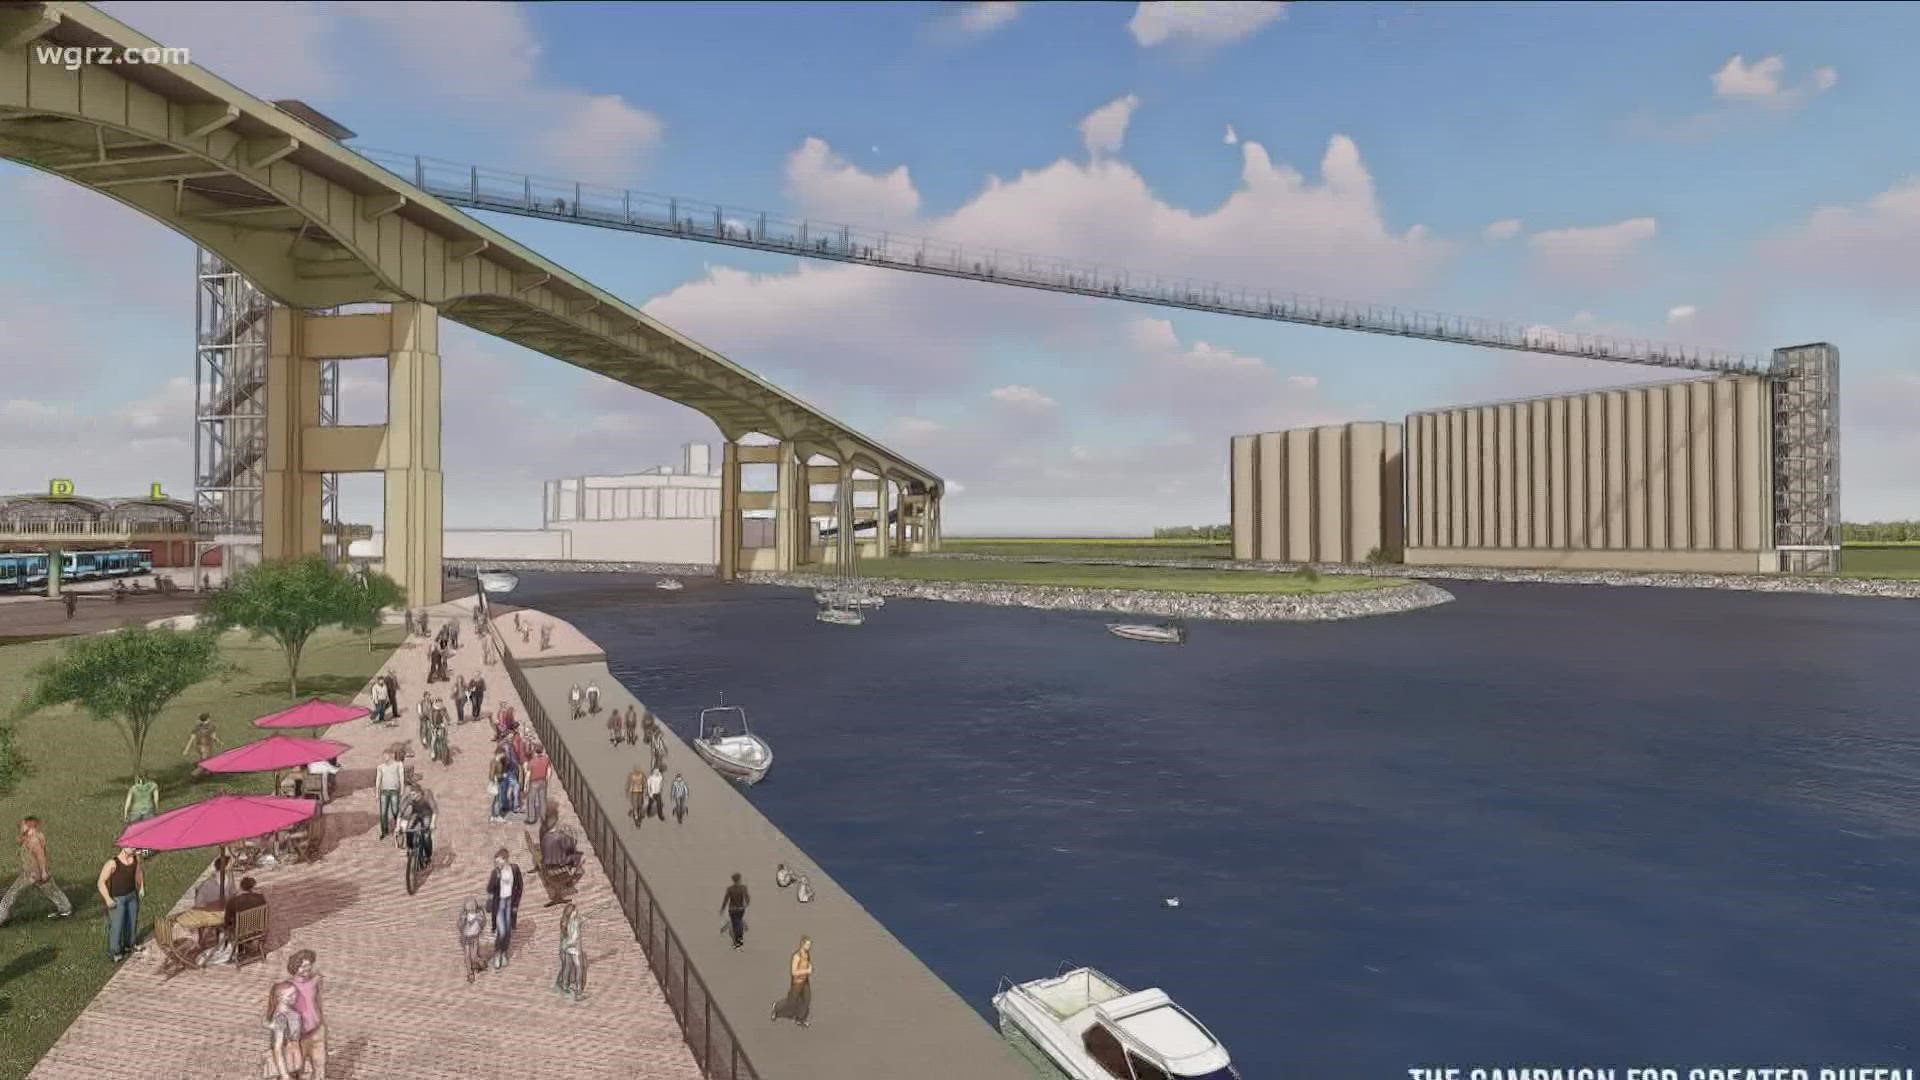 An 800 foot suspension bridge would run between the foot of Main Street at the DL&W Terminal to a grain elevator on the other side of the Buffalo River.